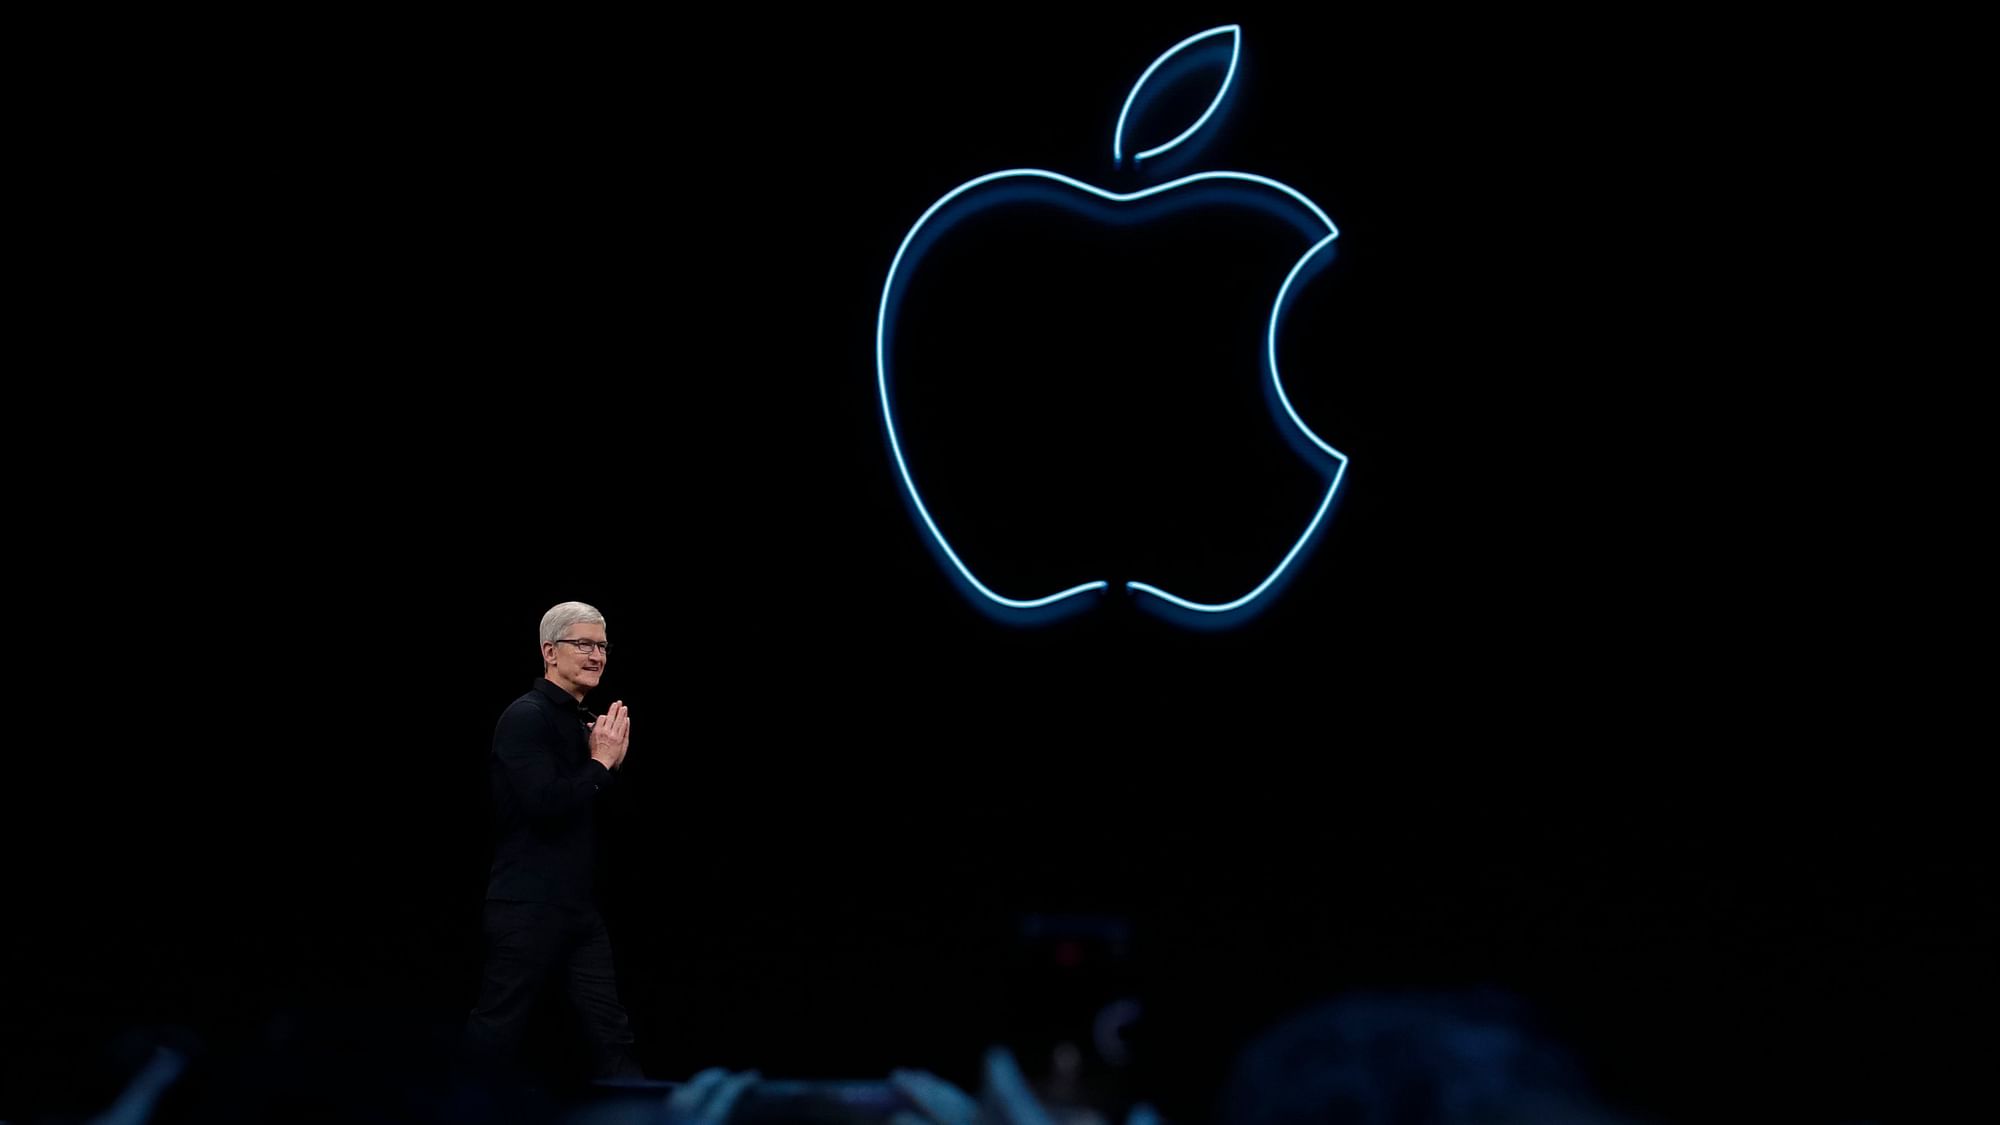 This year’s Apple event is going to be held virtually without a live audience at the venue.&nbsp;